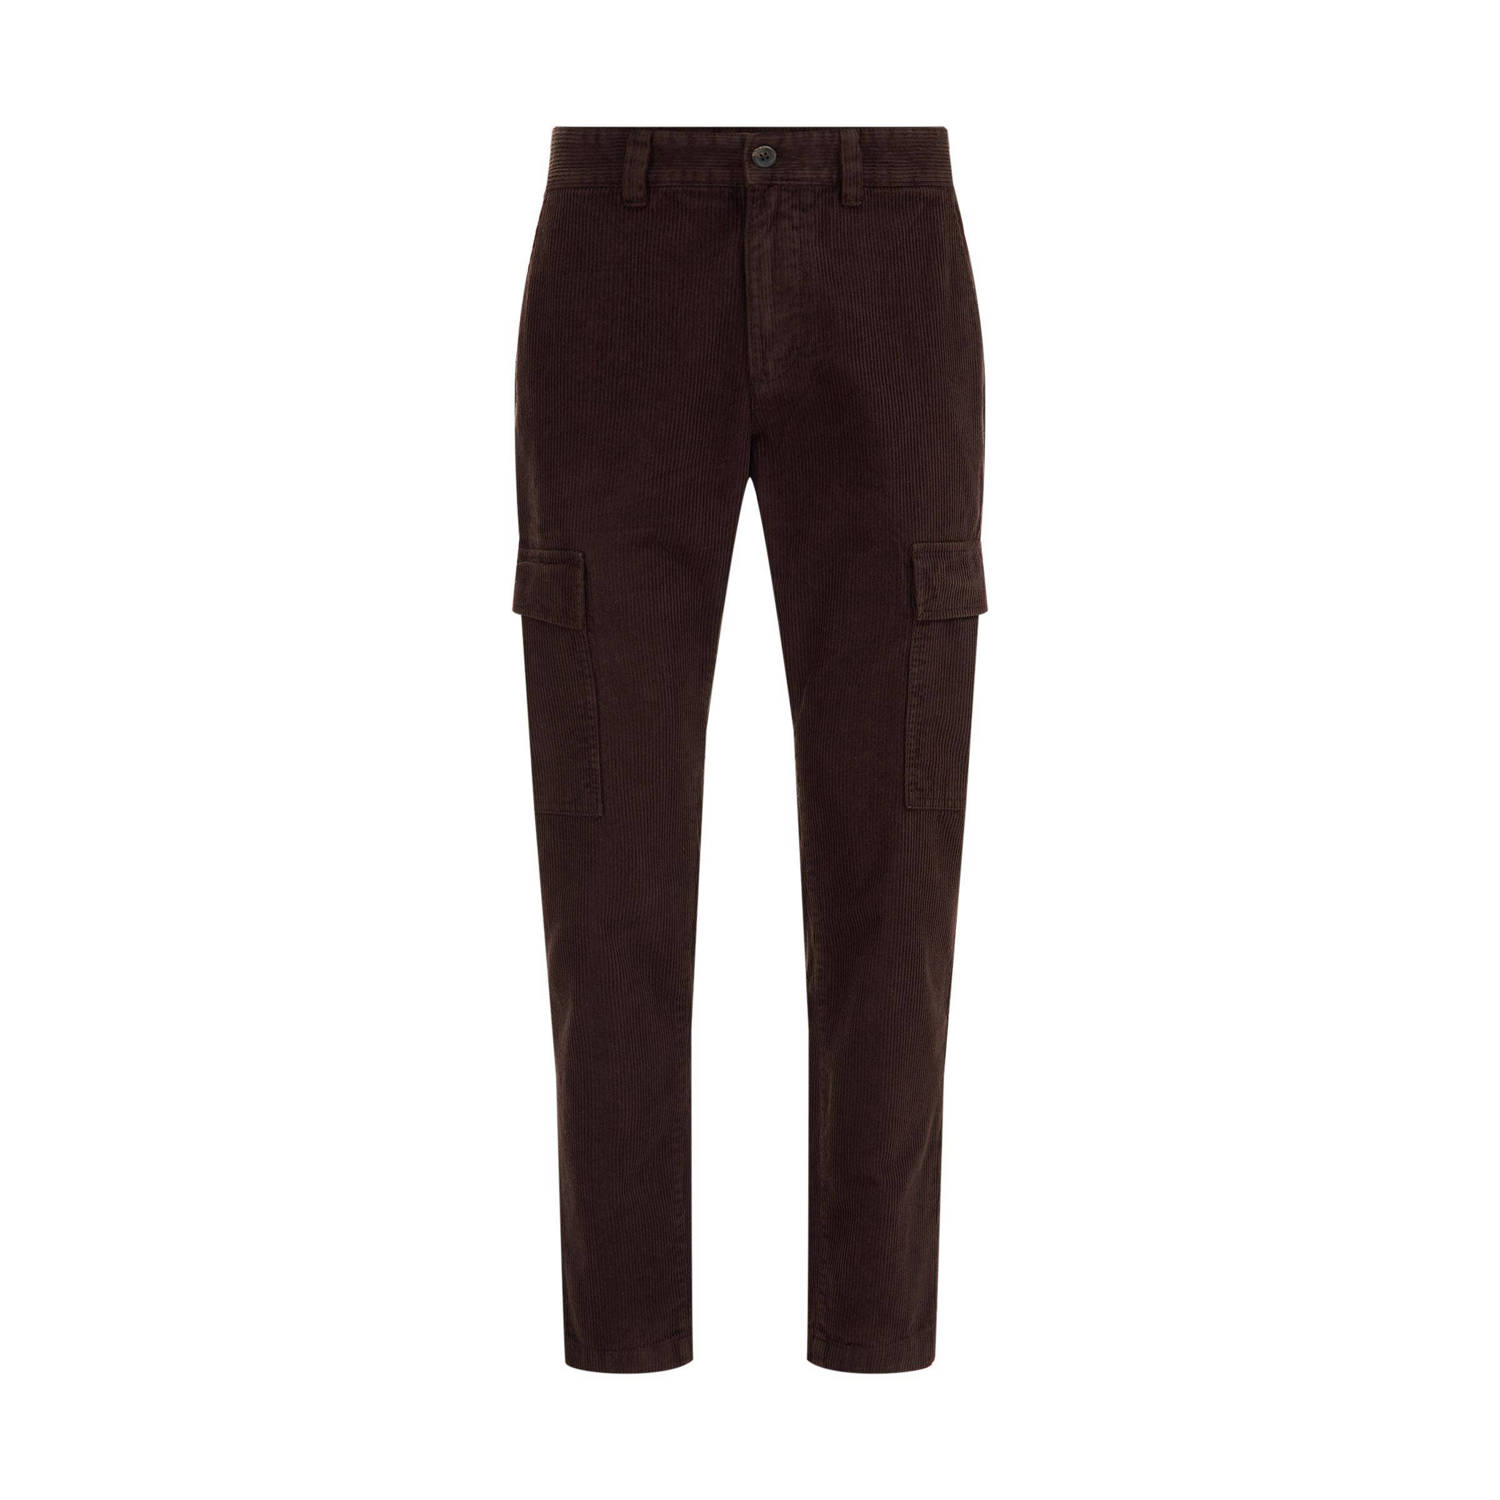 WE Fashion corduroy tapered fit cargo broek donkerbruin